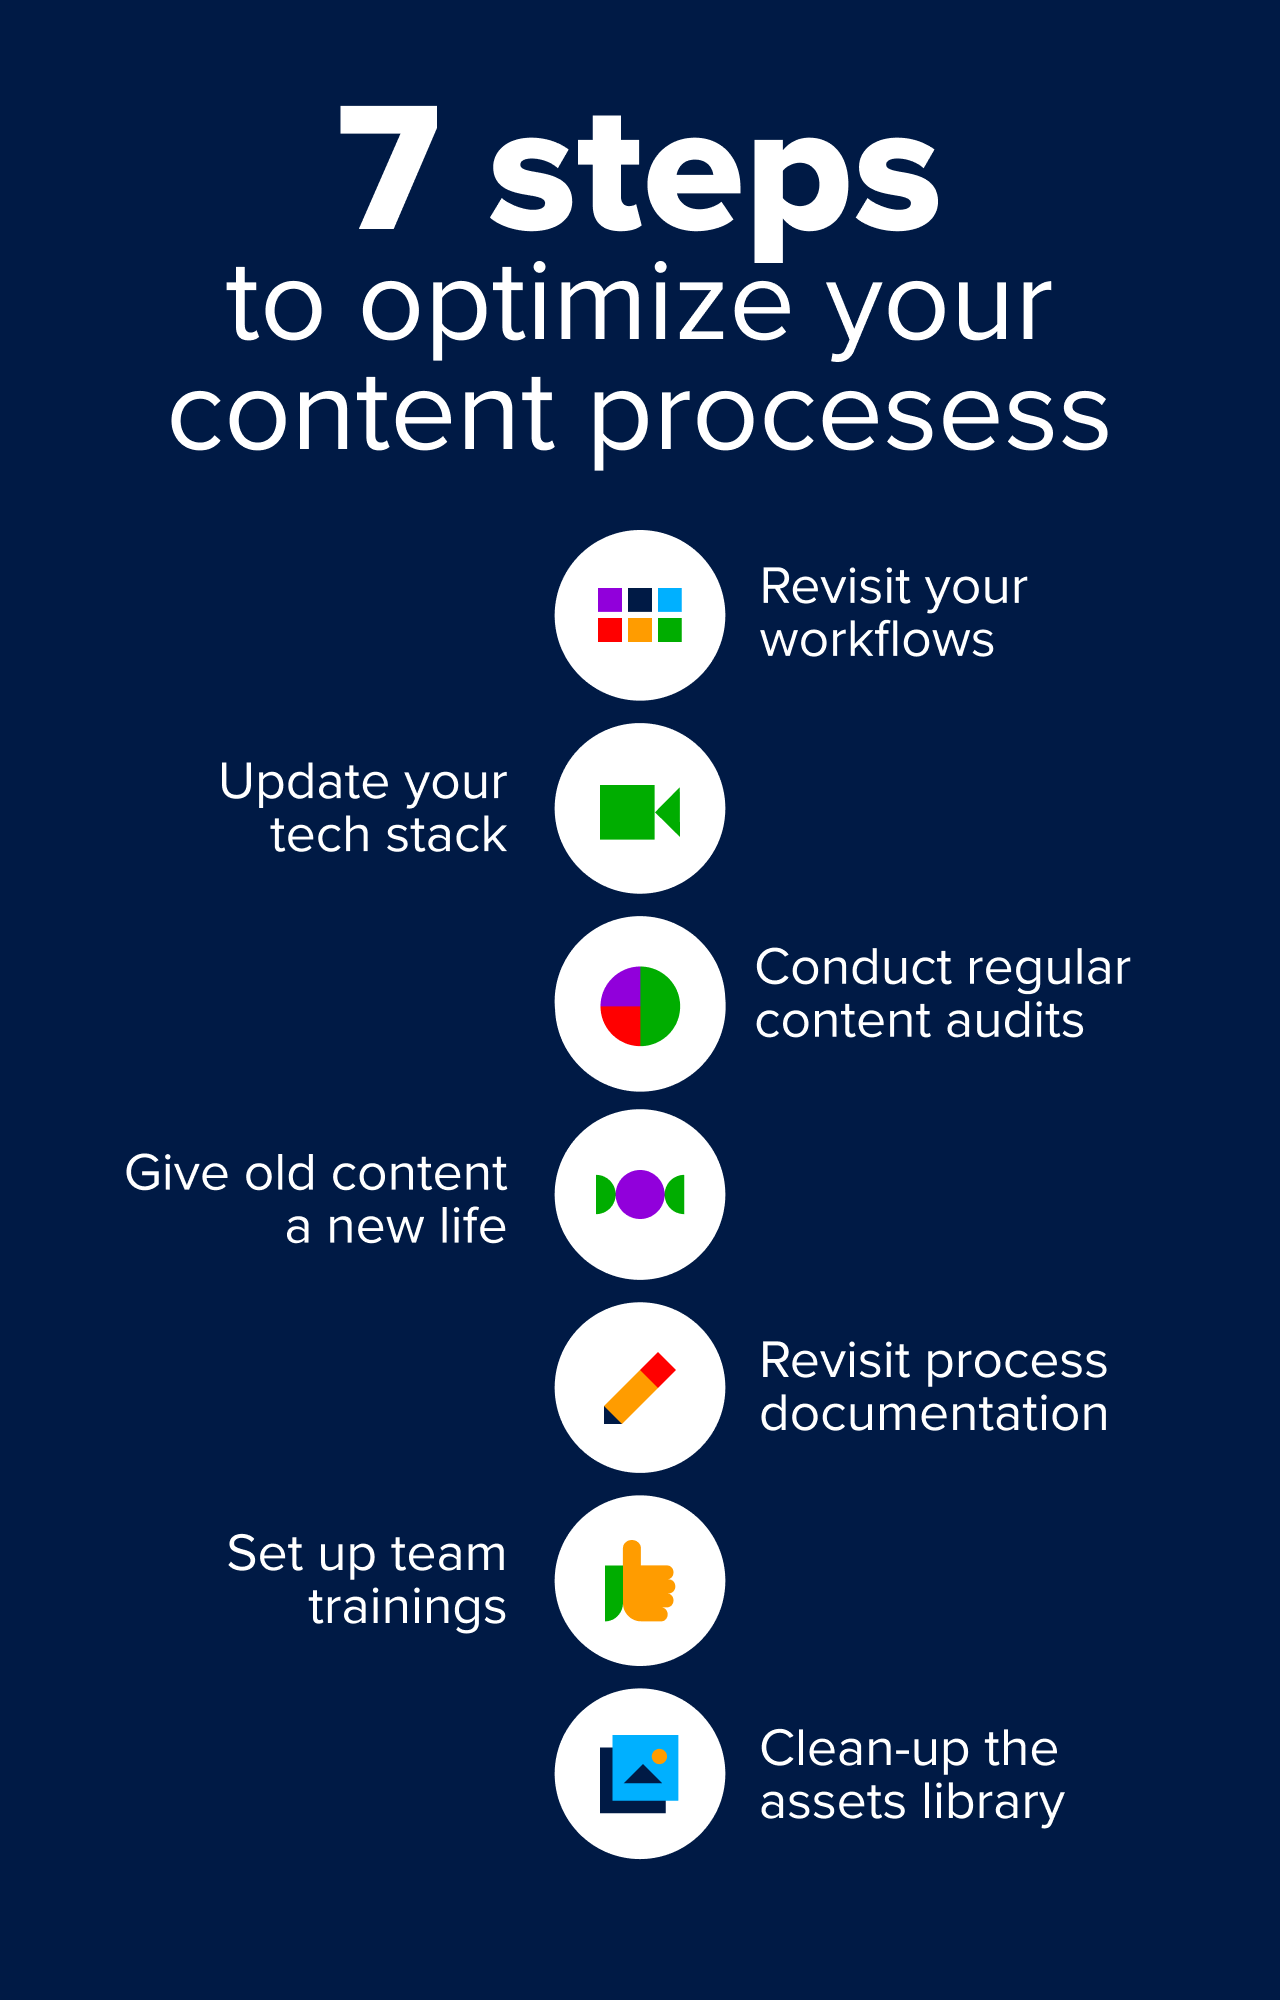 7 steps to optimize your content processes